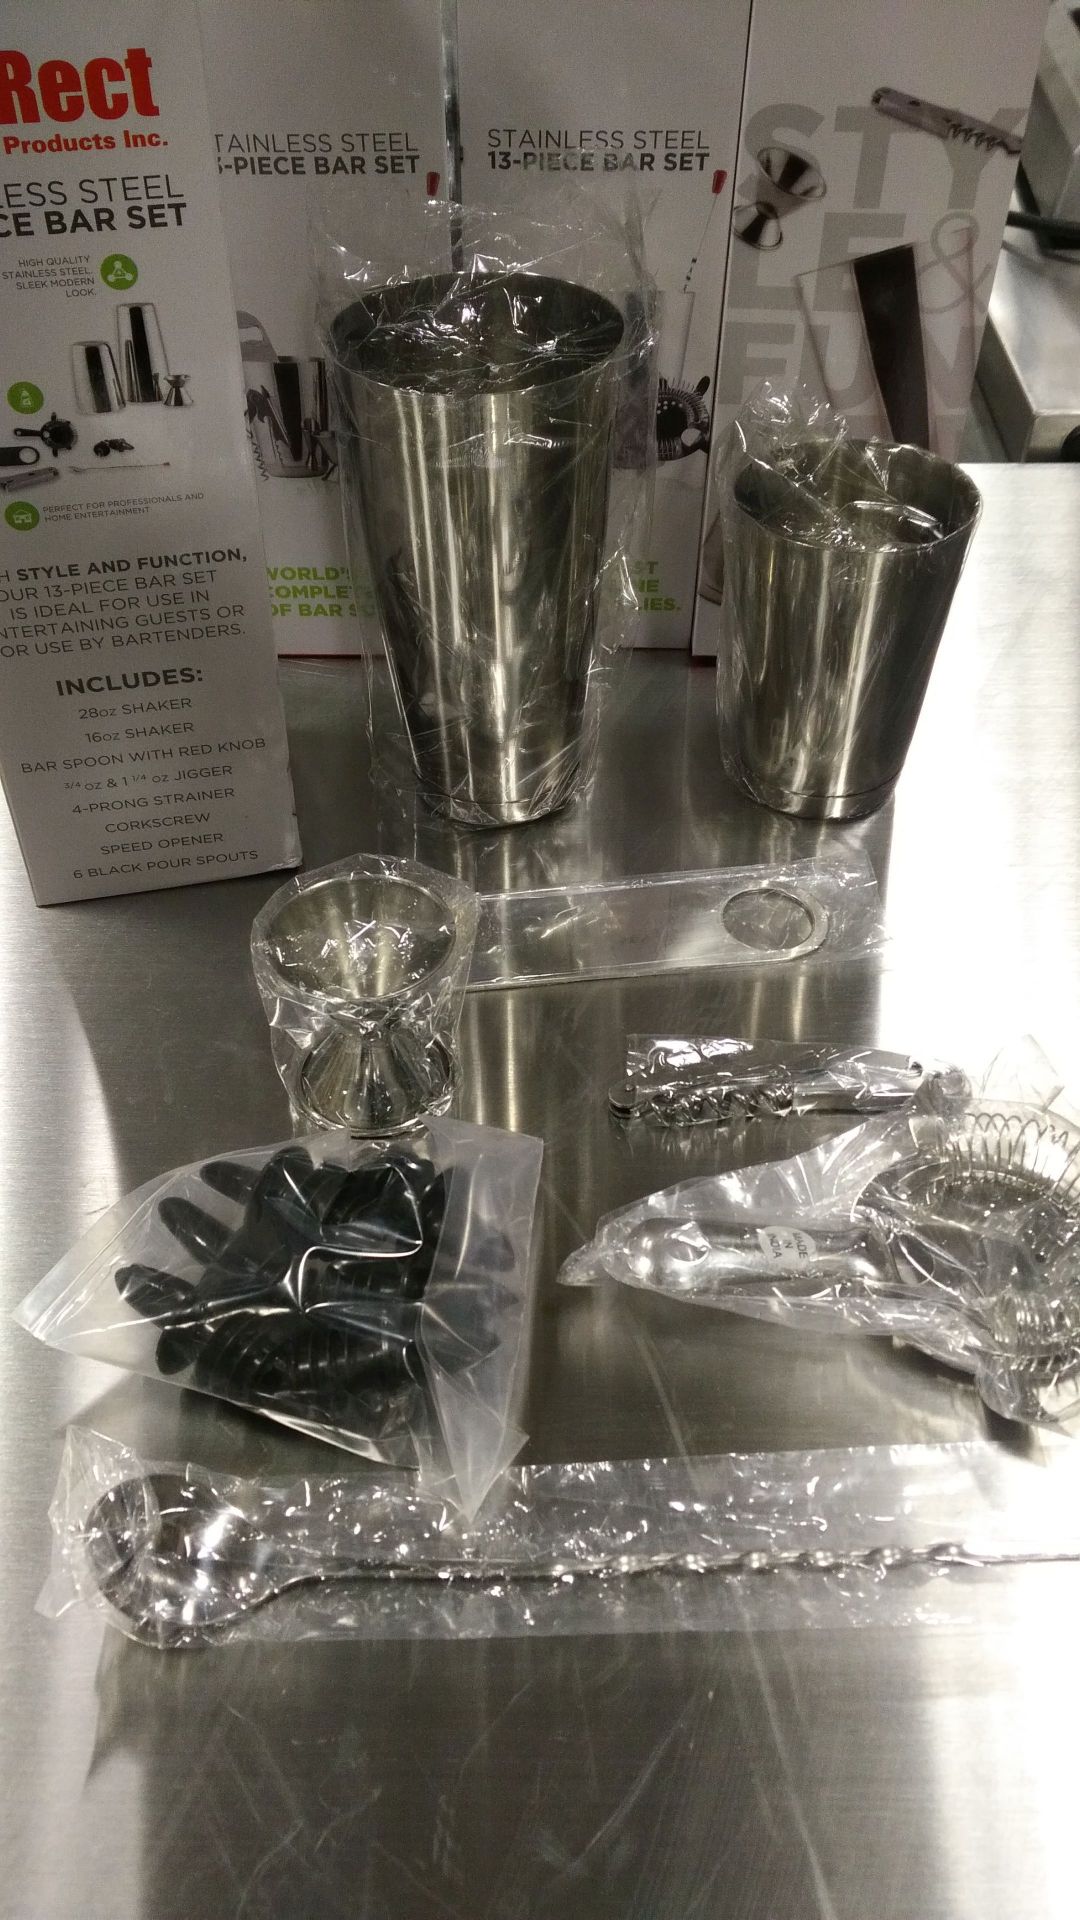 13 Piece Stainless Steel Home Bar Starter Set - Image 3 of 3